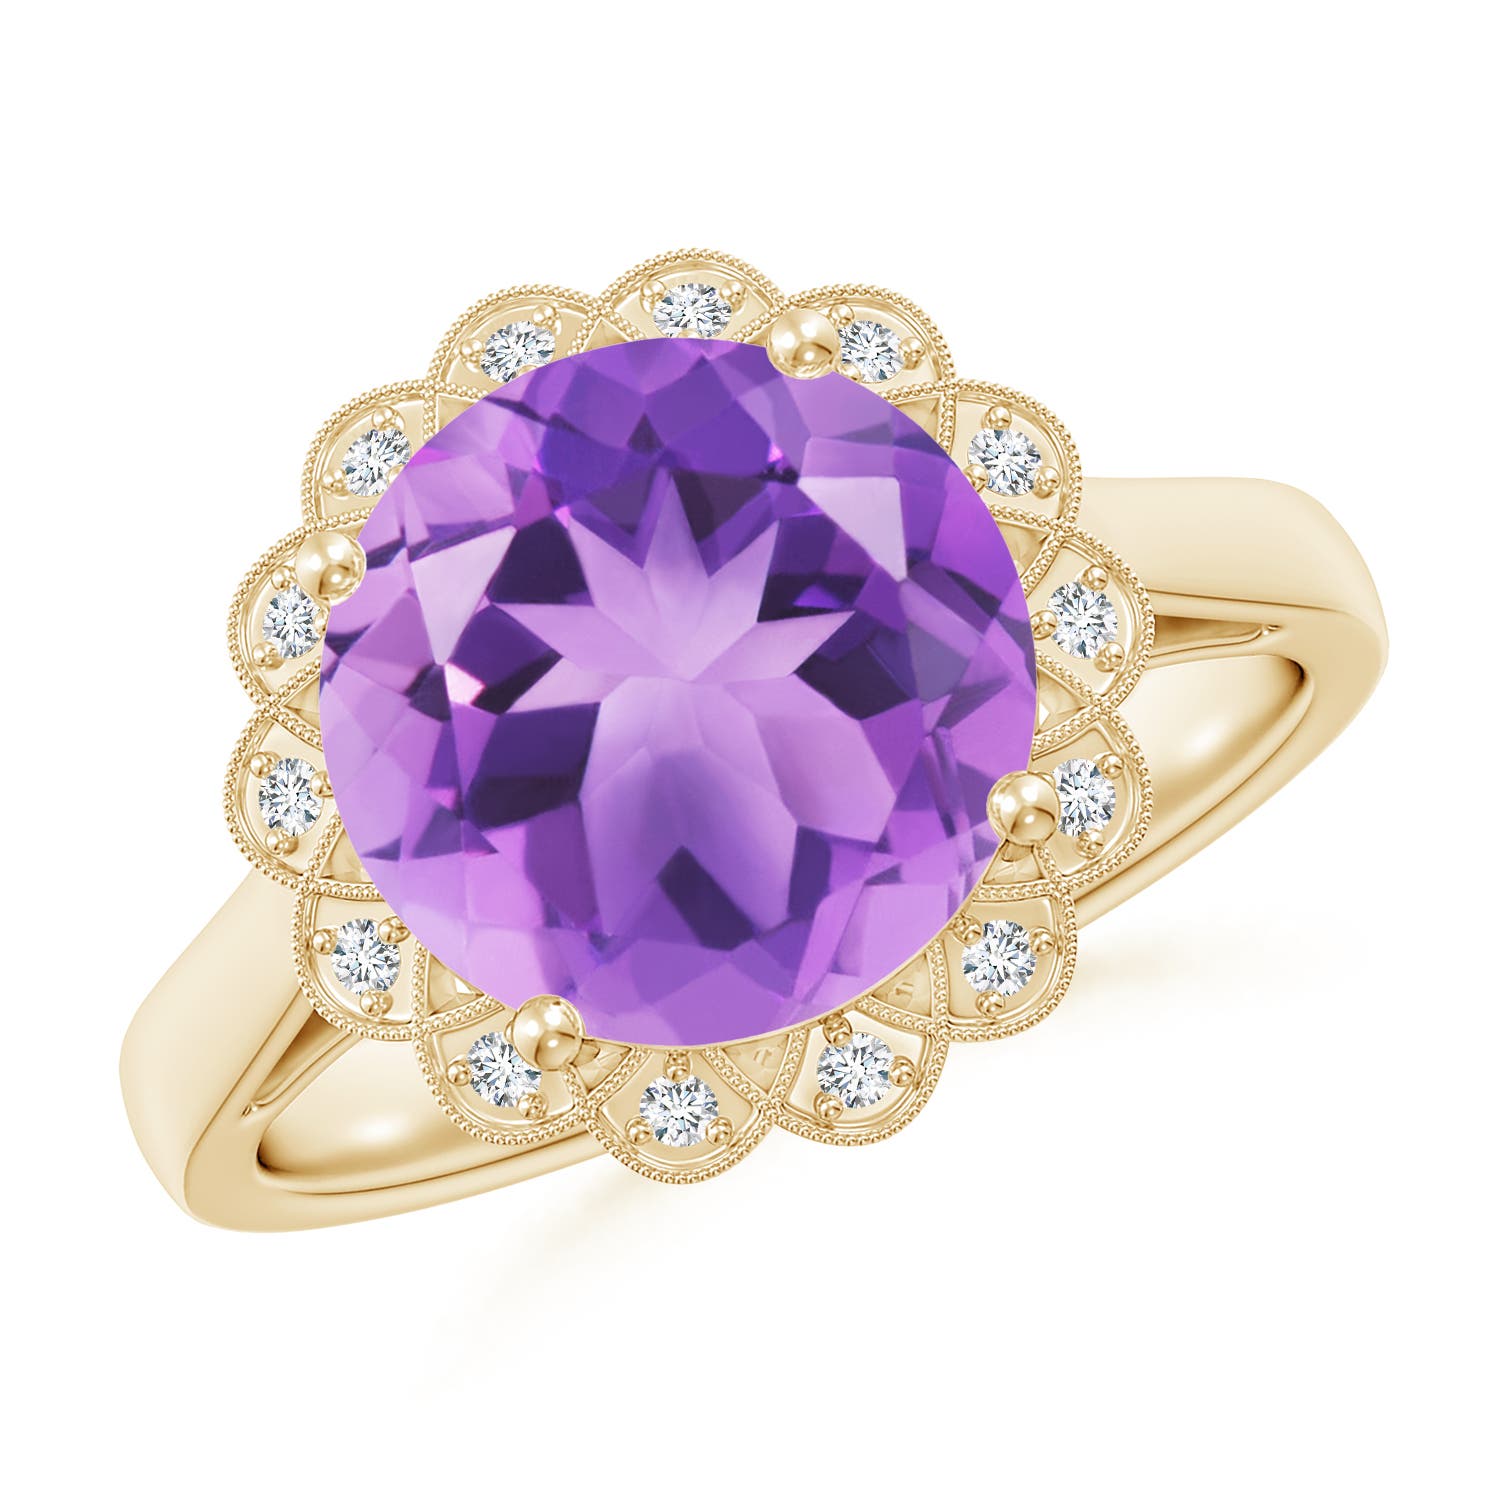 A - Amethyst / 3.28 CT / 14 KT Yellow Gold